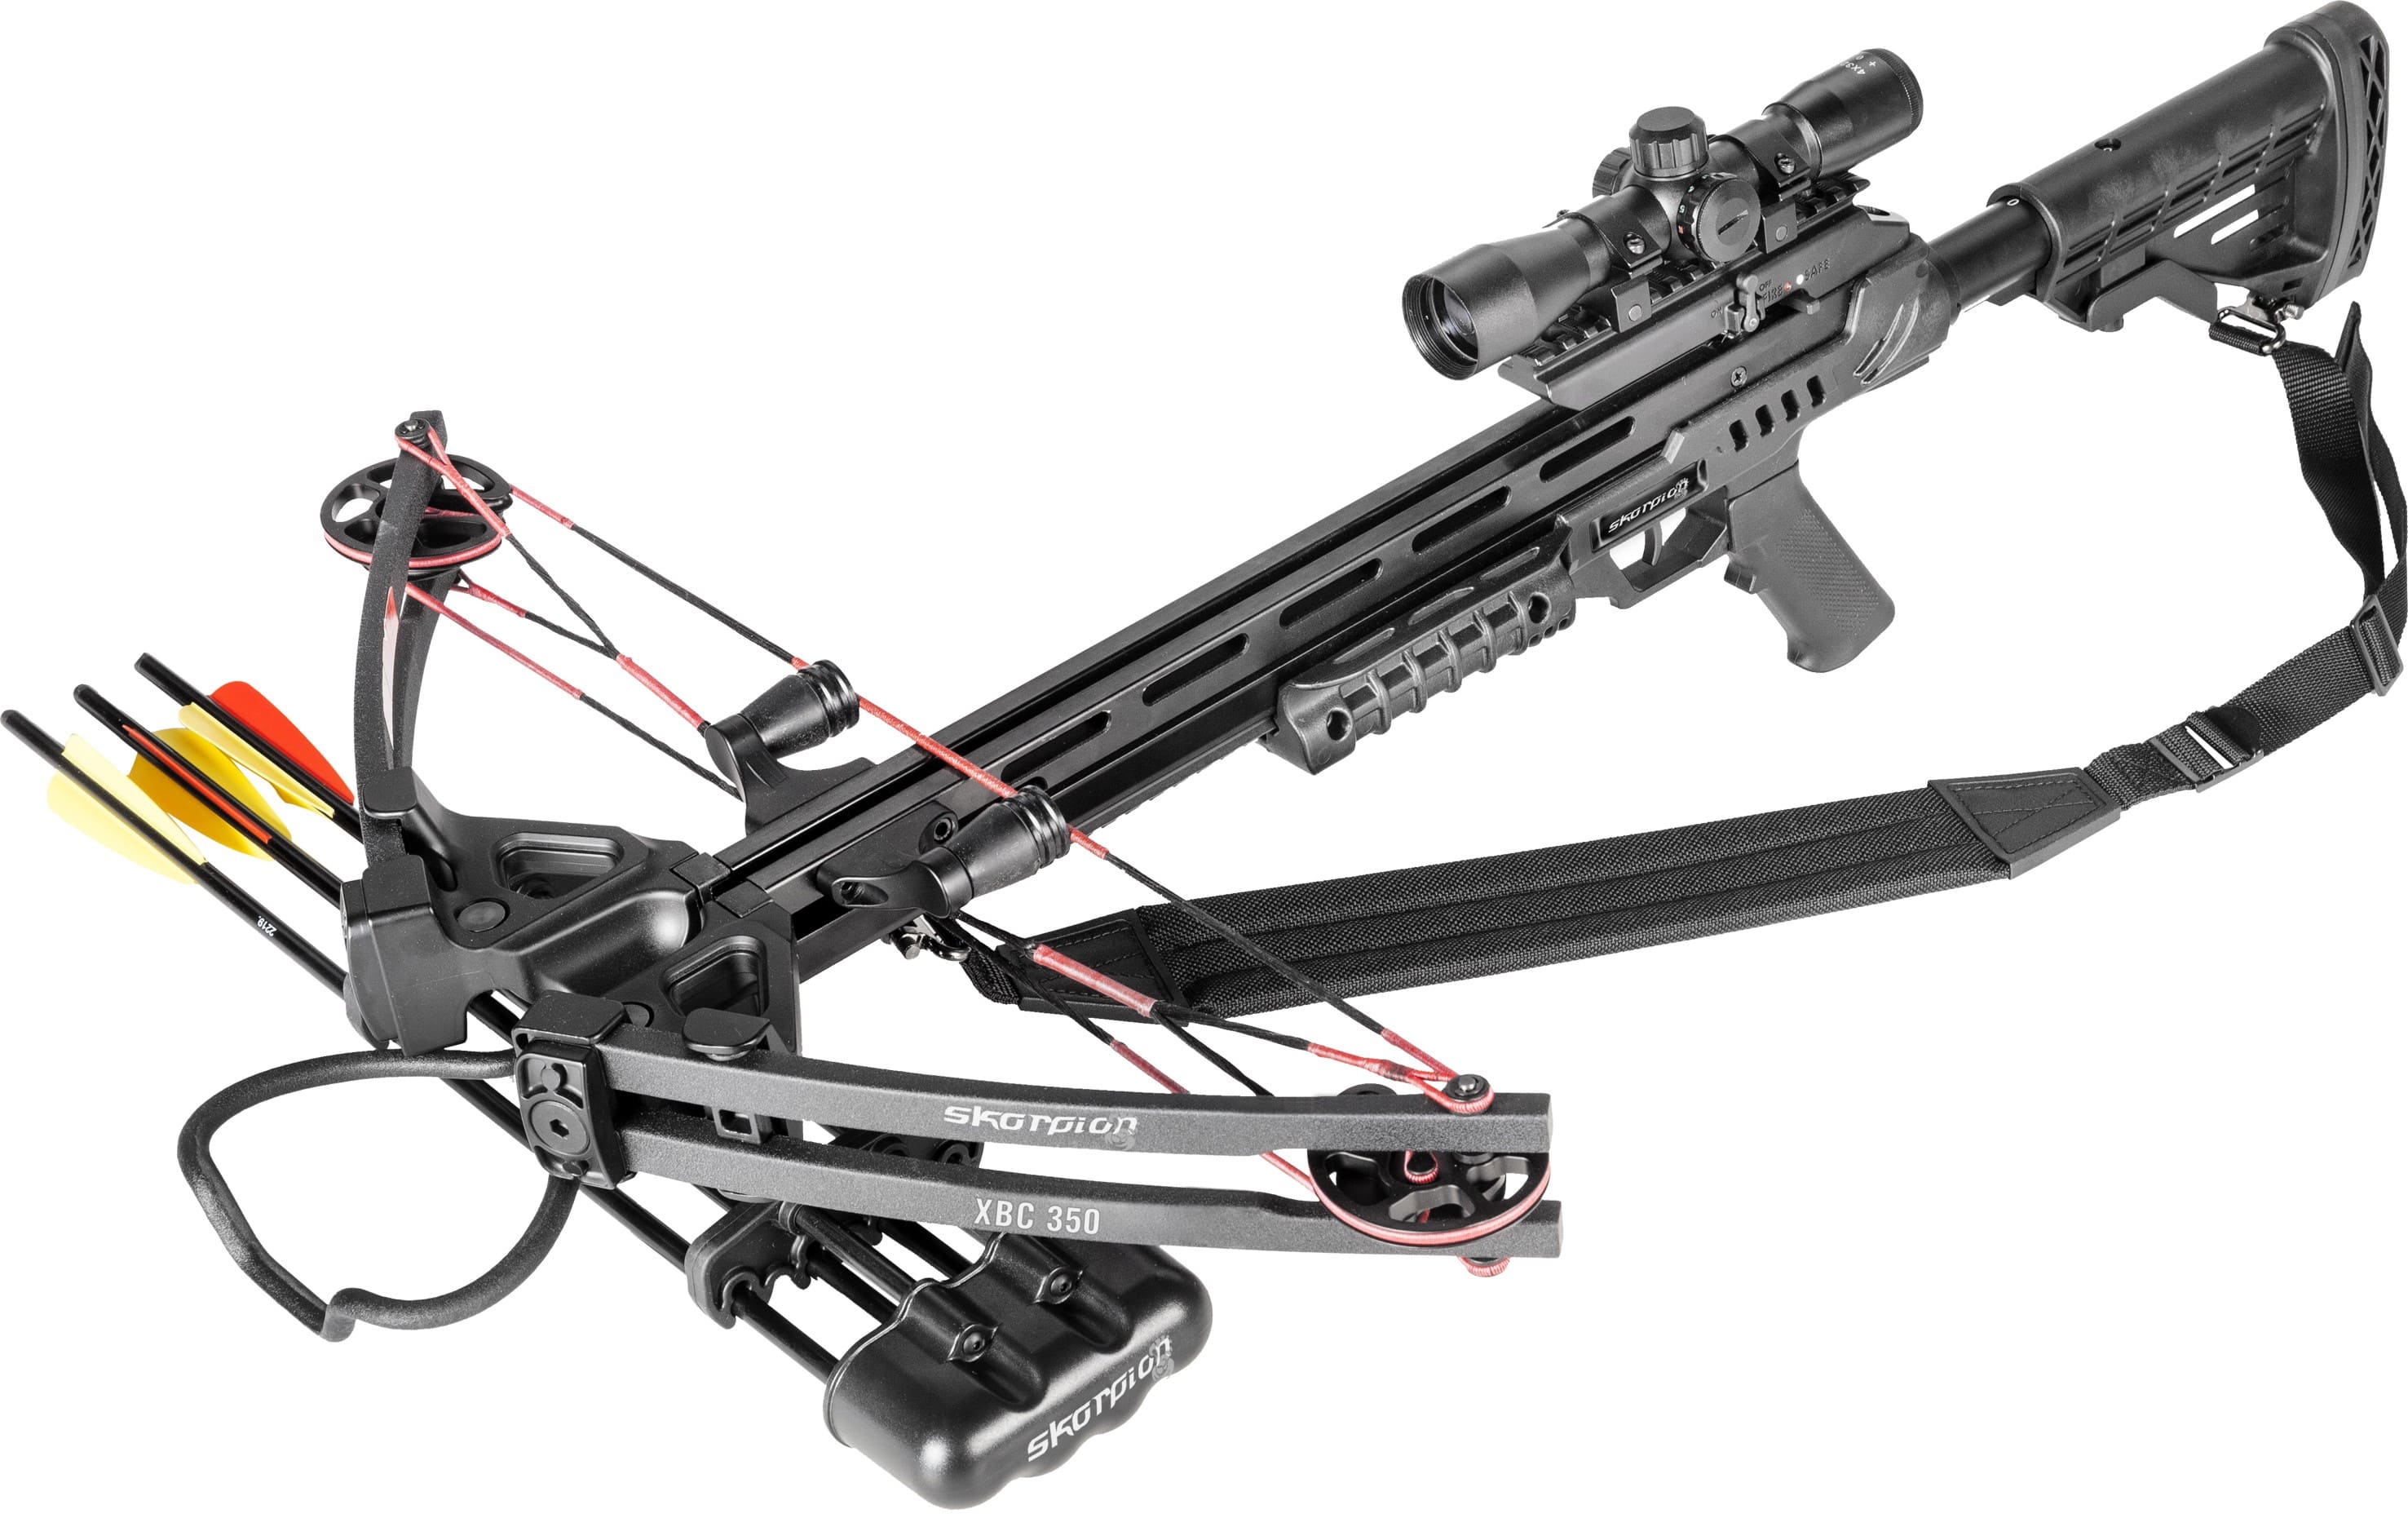 Compound crossbow.